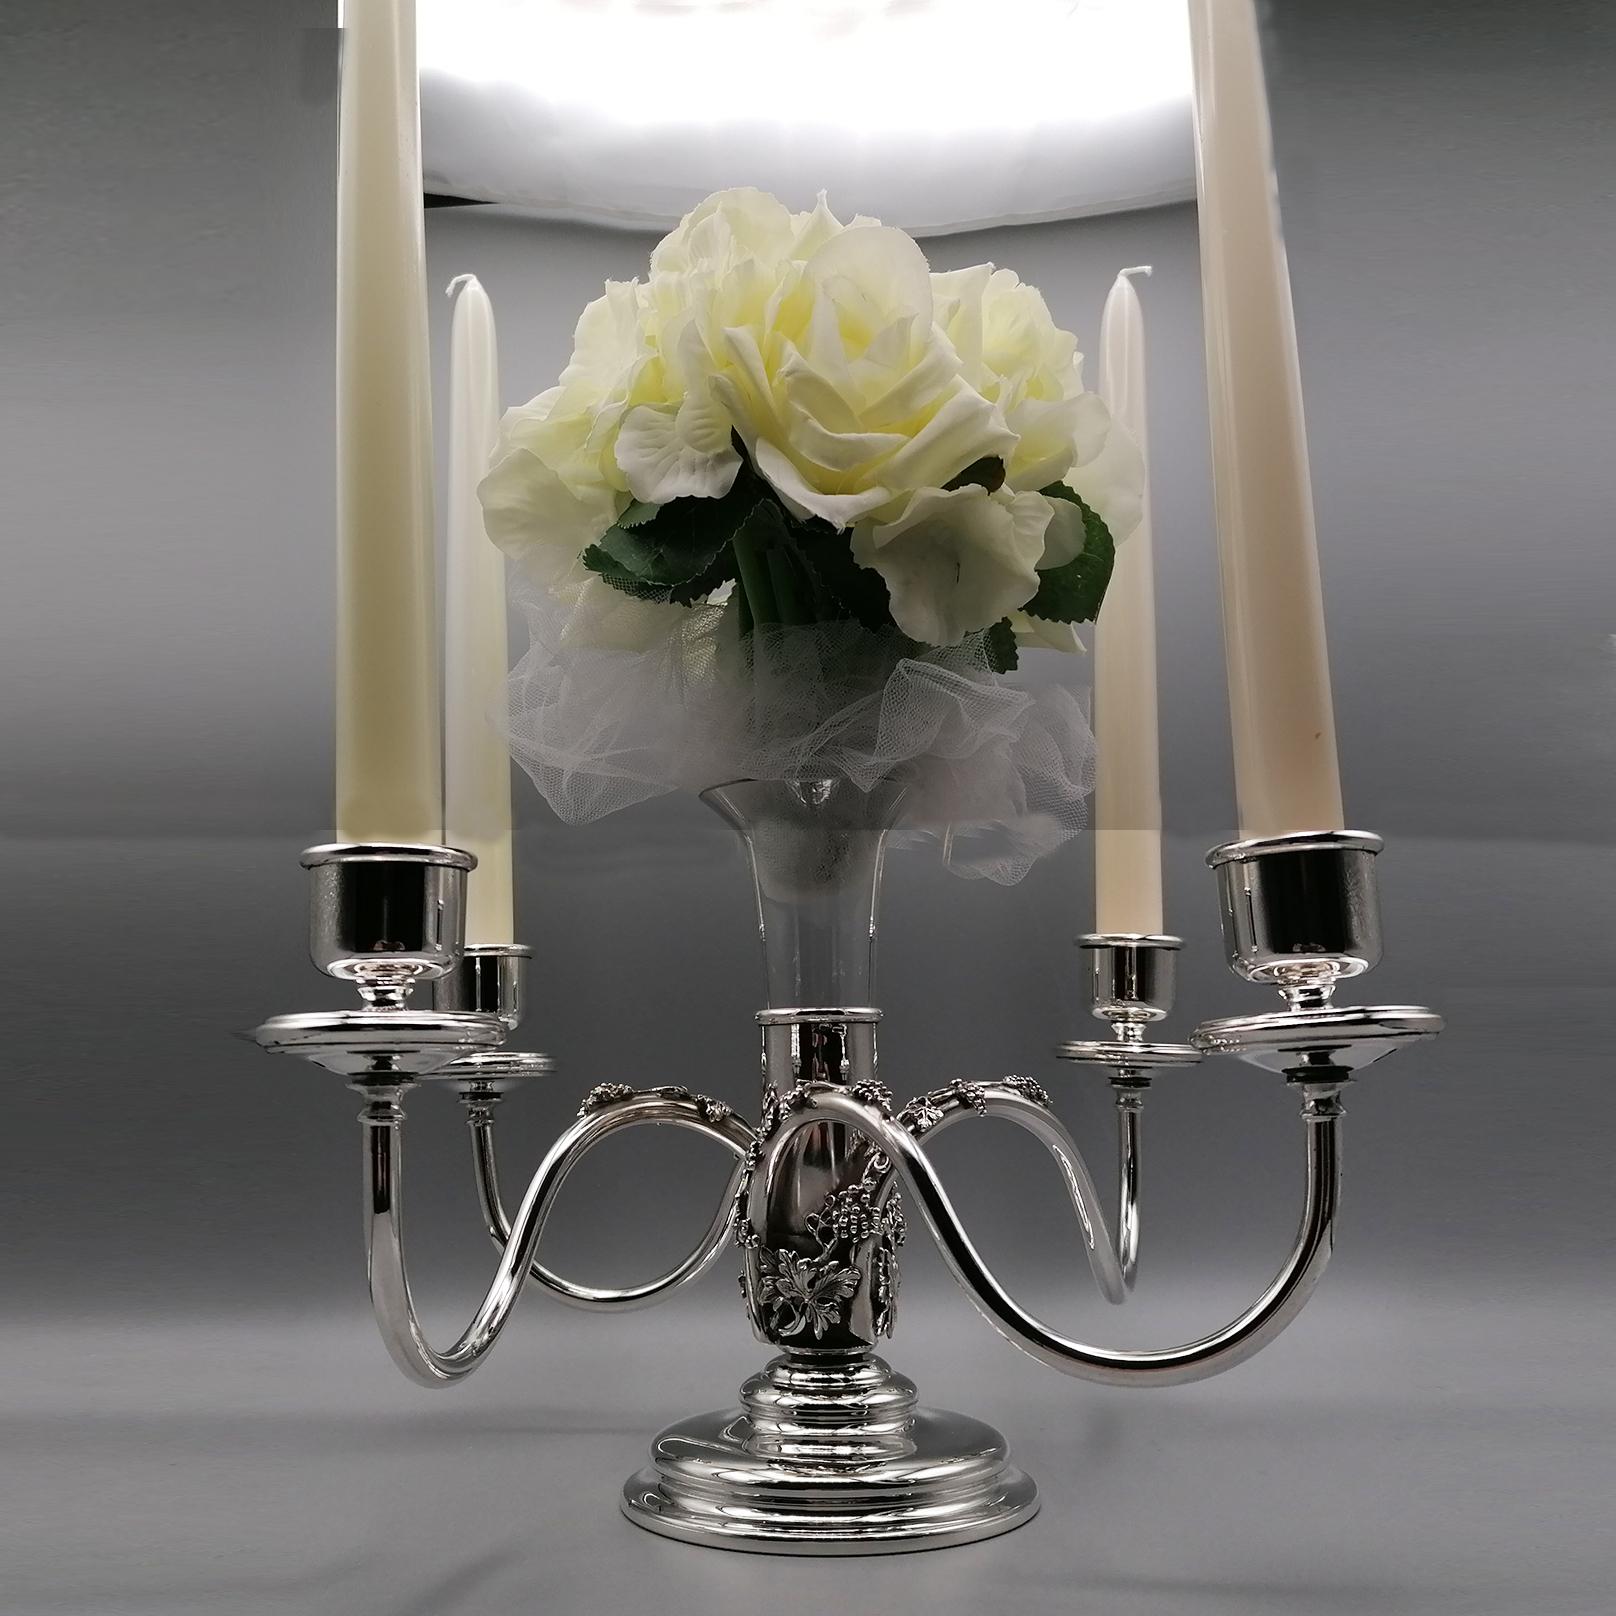 Hand-Crafted 20th Century Italian 4 Light Candelabra with Flower Holder For Sale